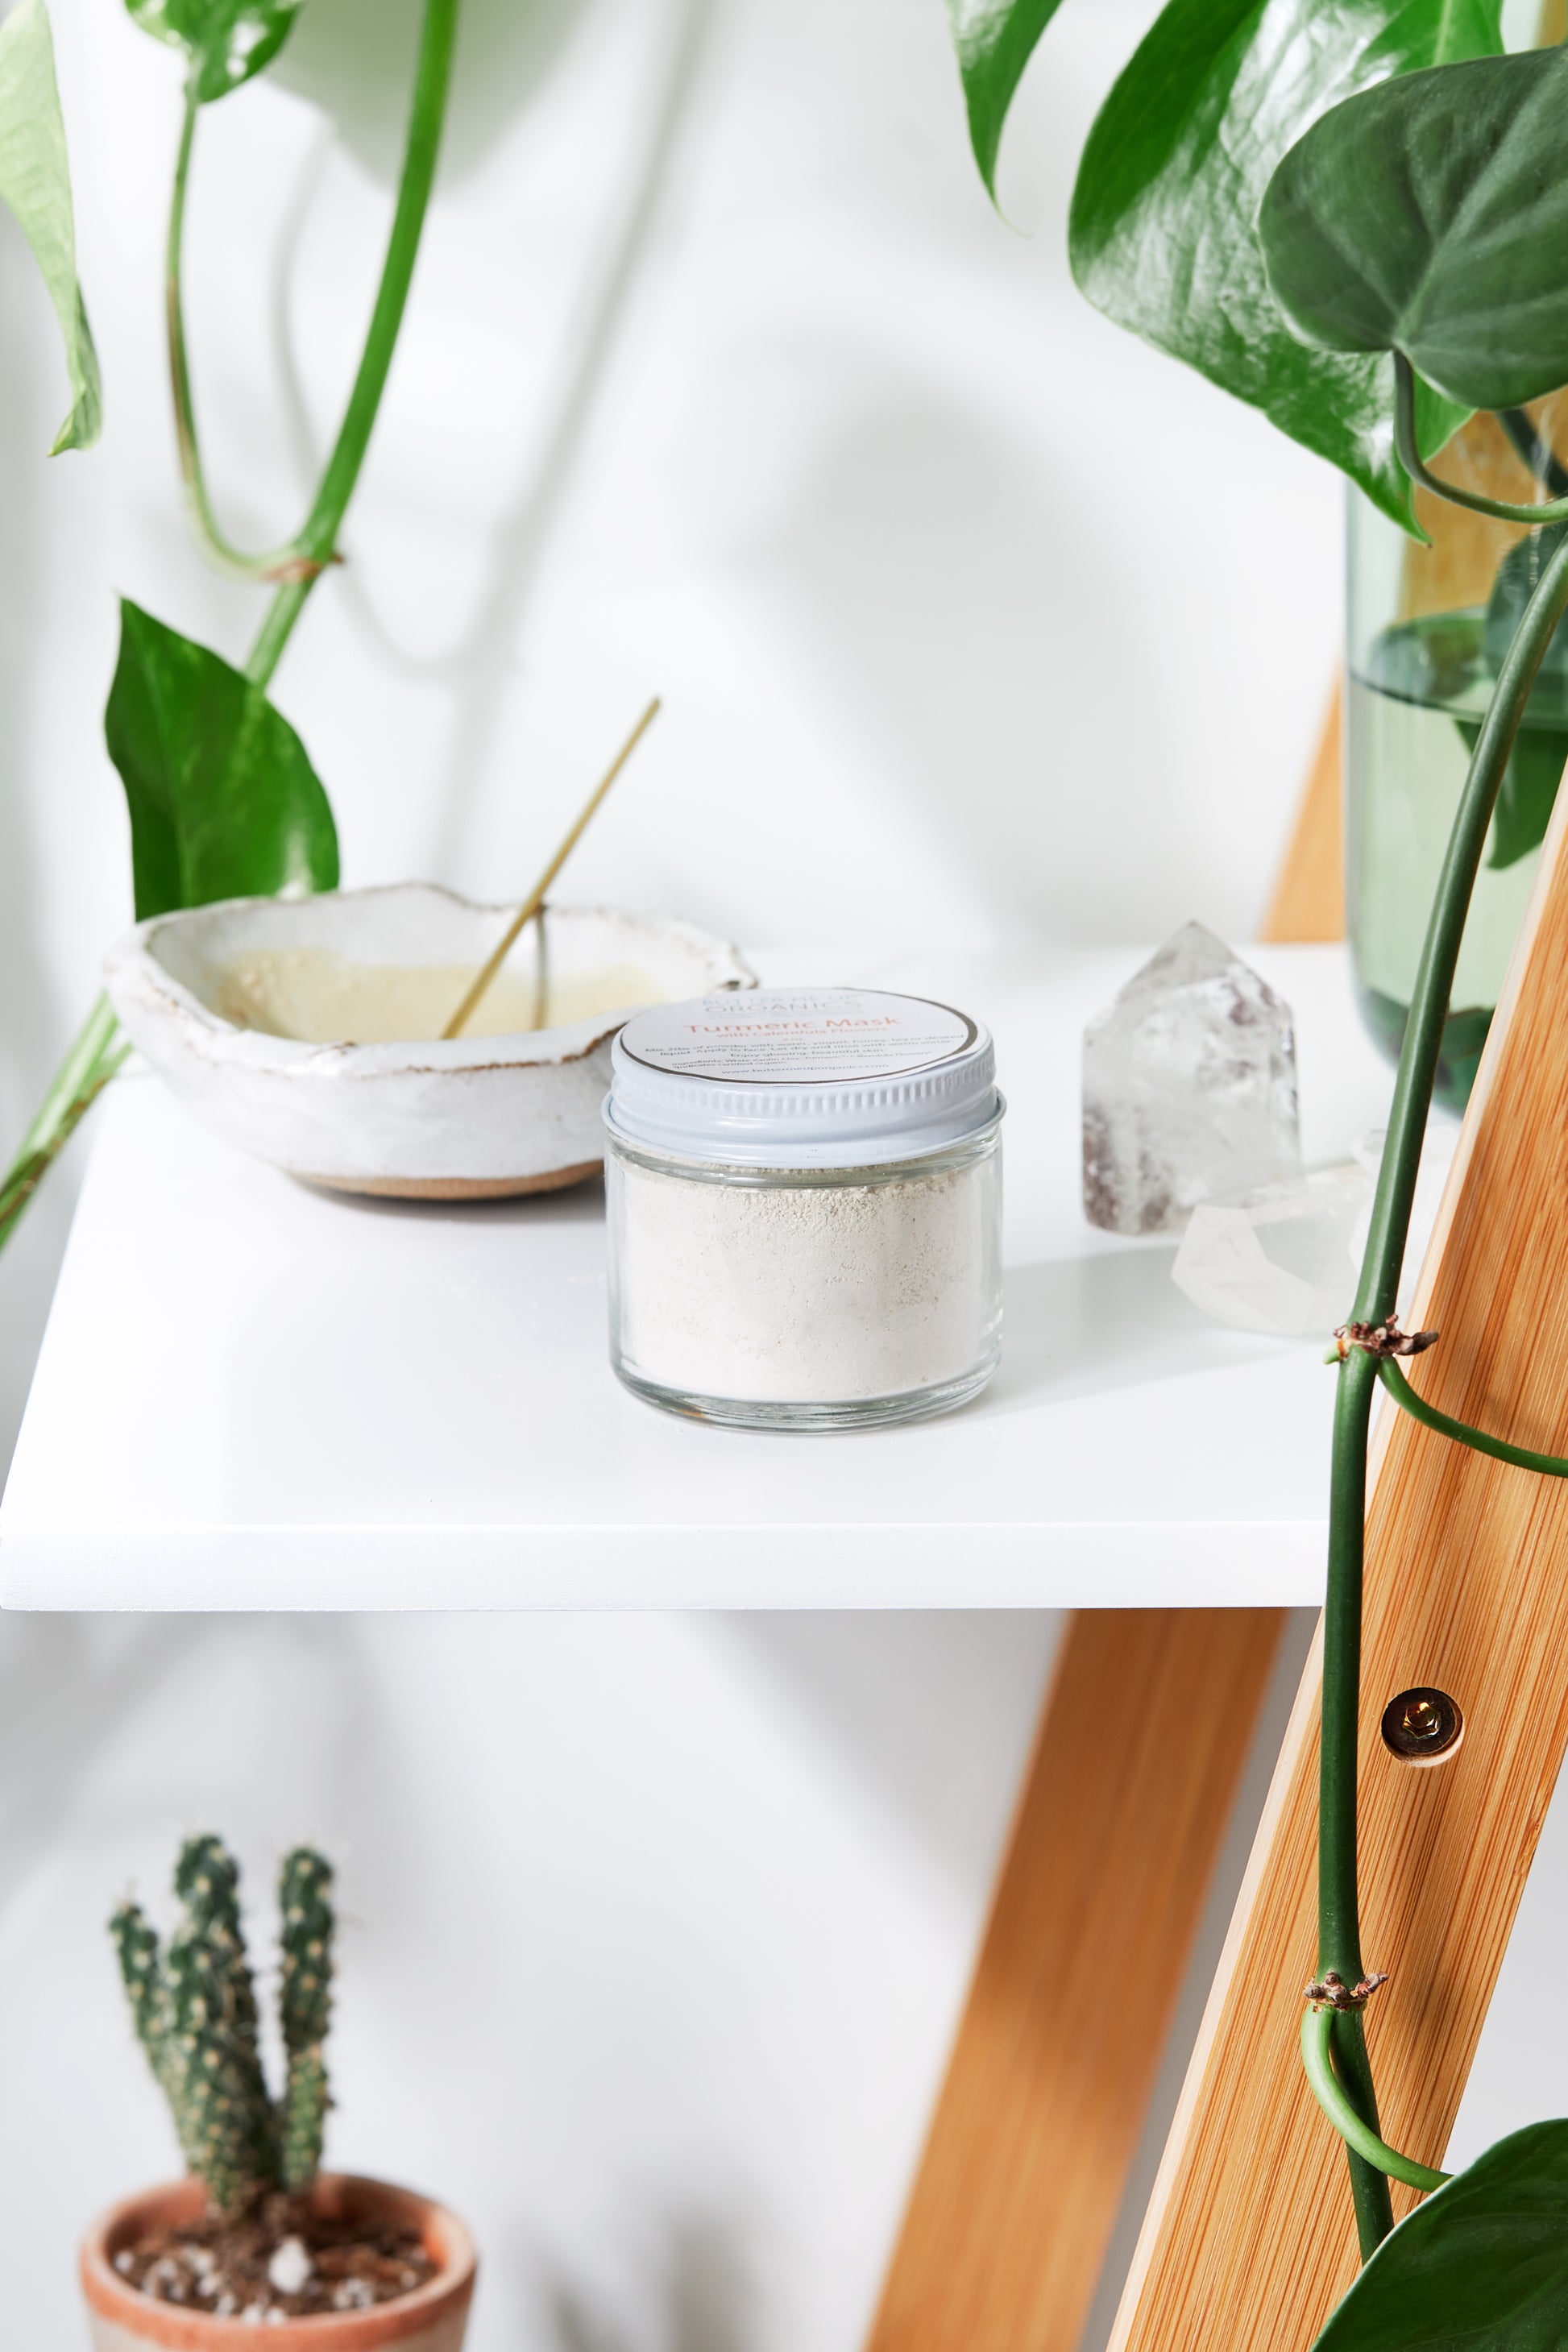 Glass jar of White Smokey Turmeric Mask on a wooden shelf surrounded by green plants and natural decor elements.